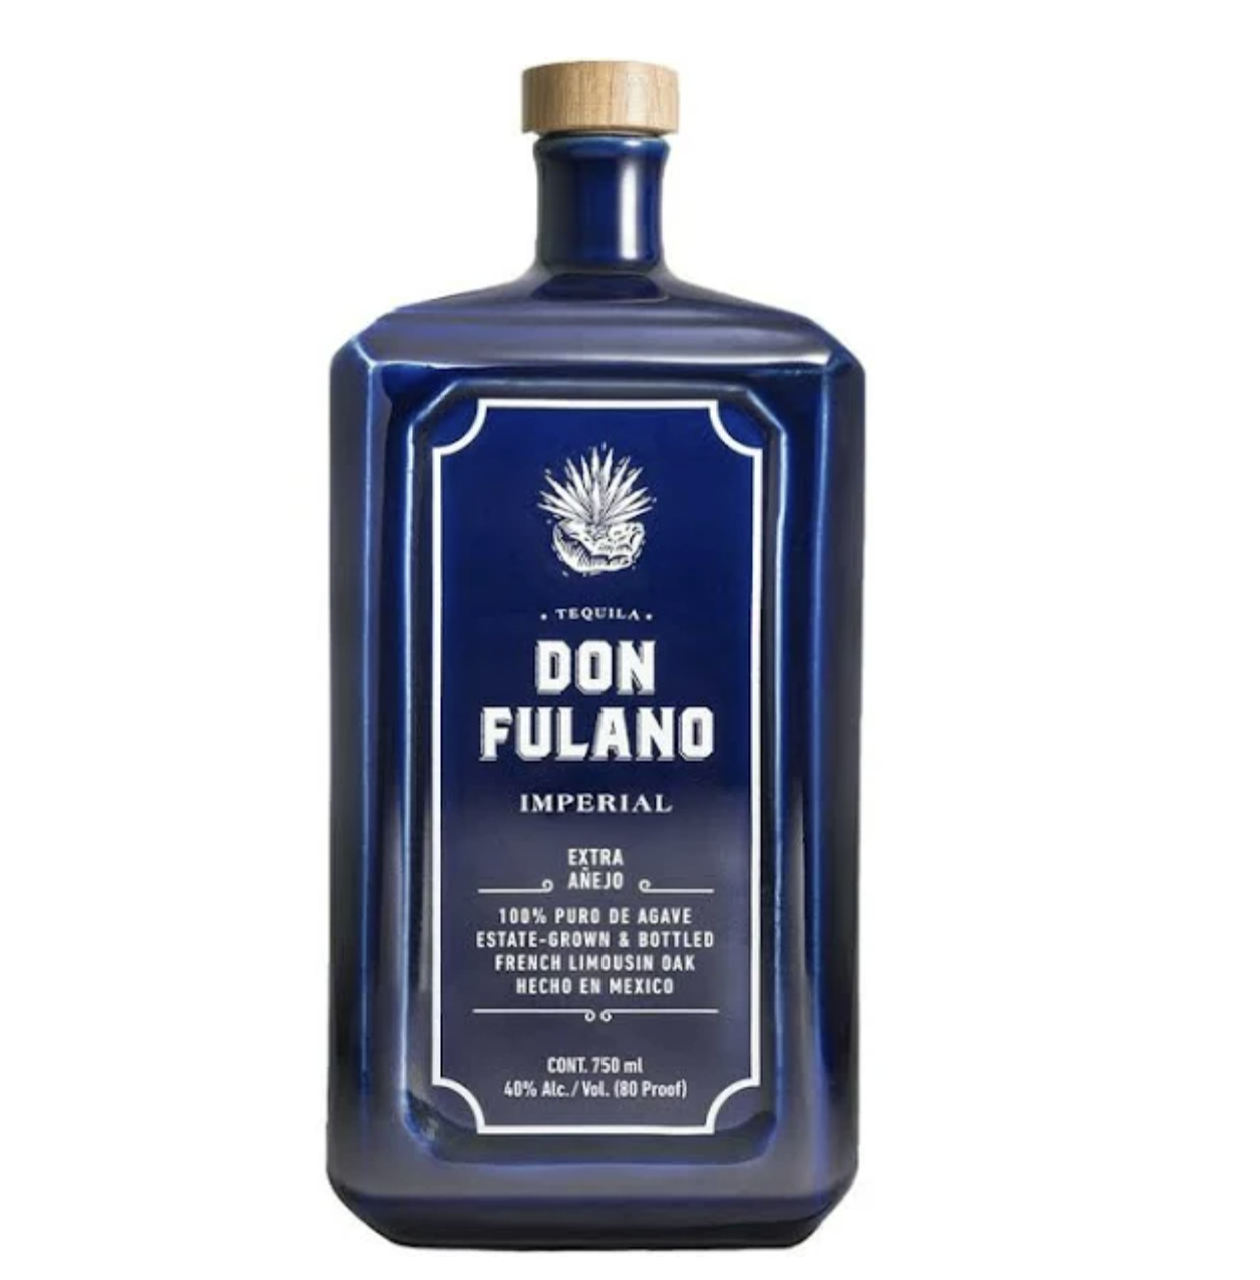 Don Fulano Imperial Extra Anejo Tequila 750 ml